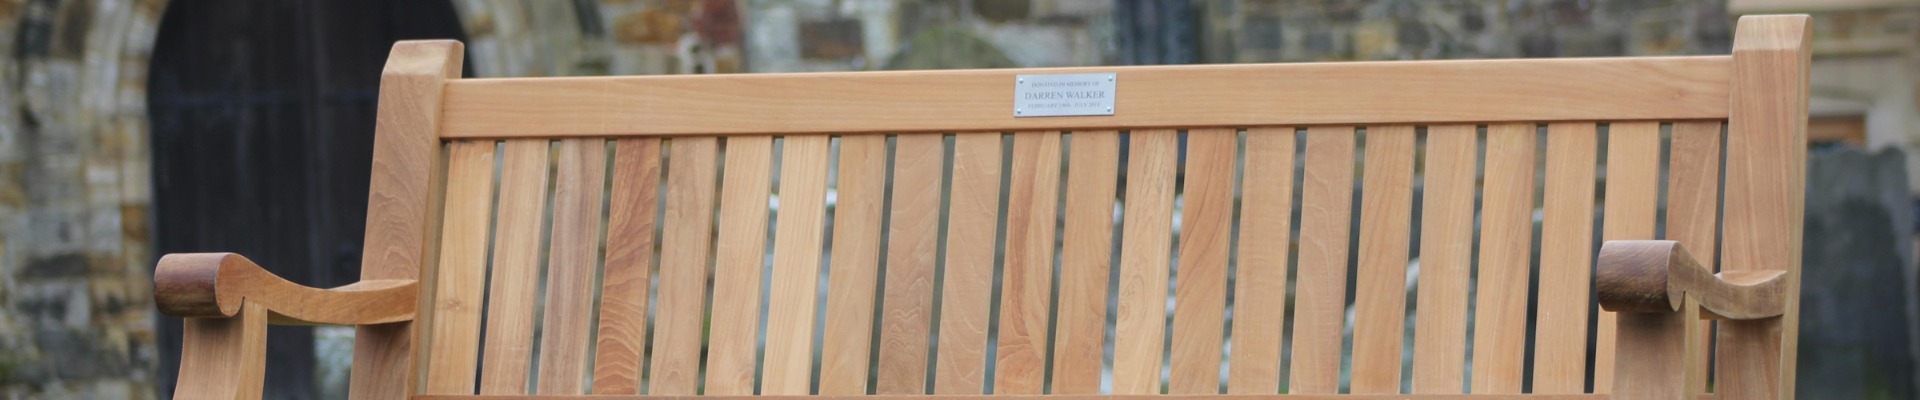 4 Seater Memorial Benches